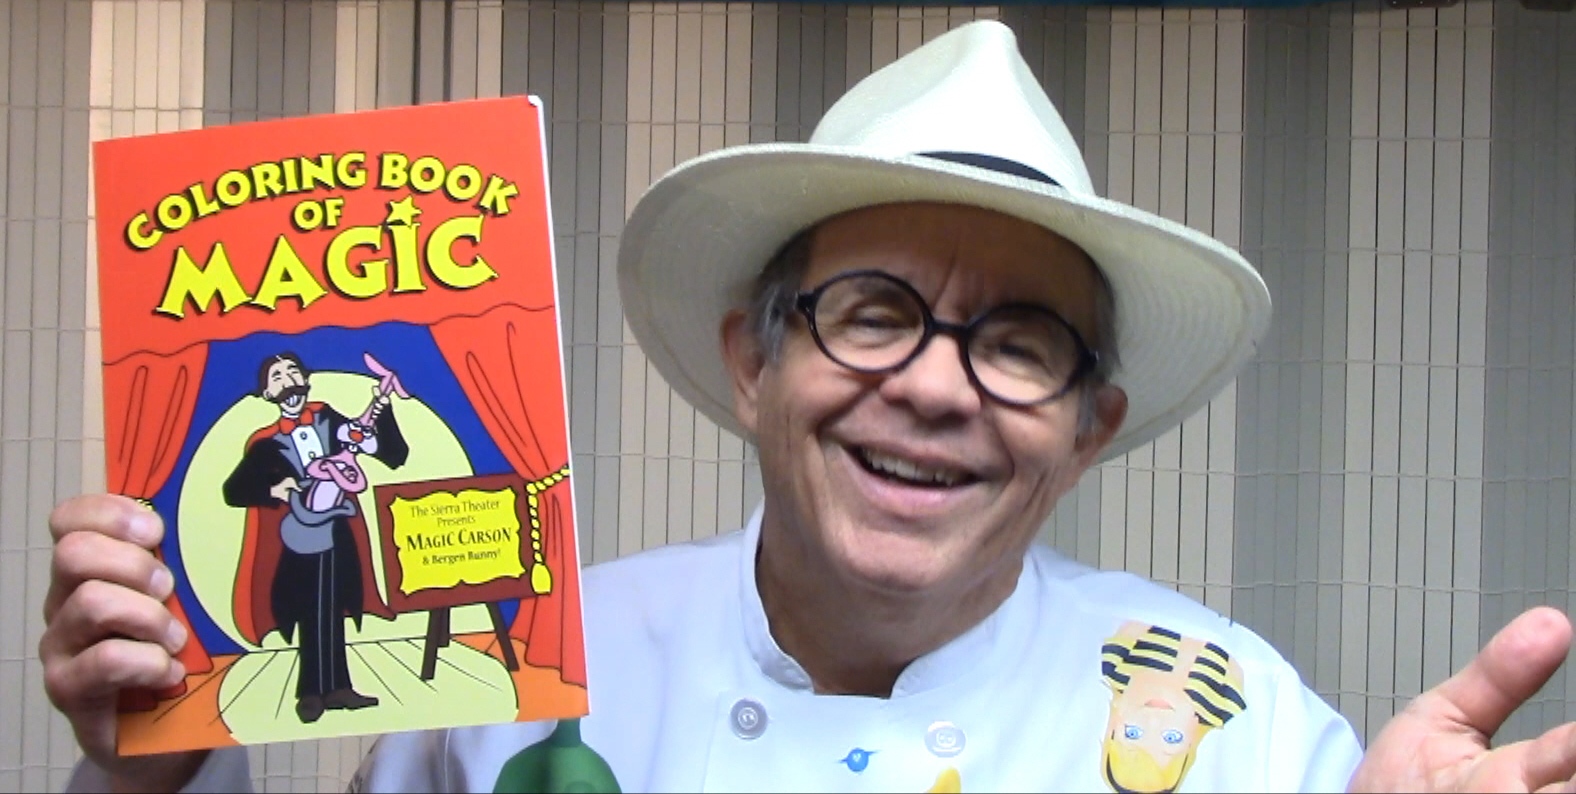 Video Of Mr. Pickles Magic Show Coloring Book.